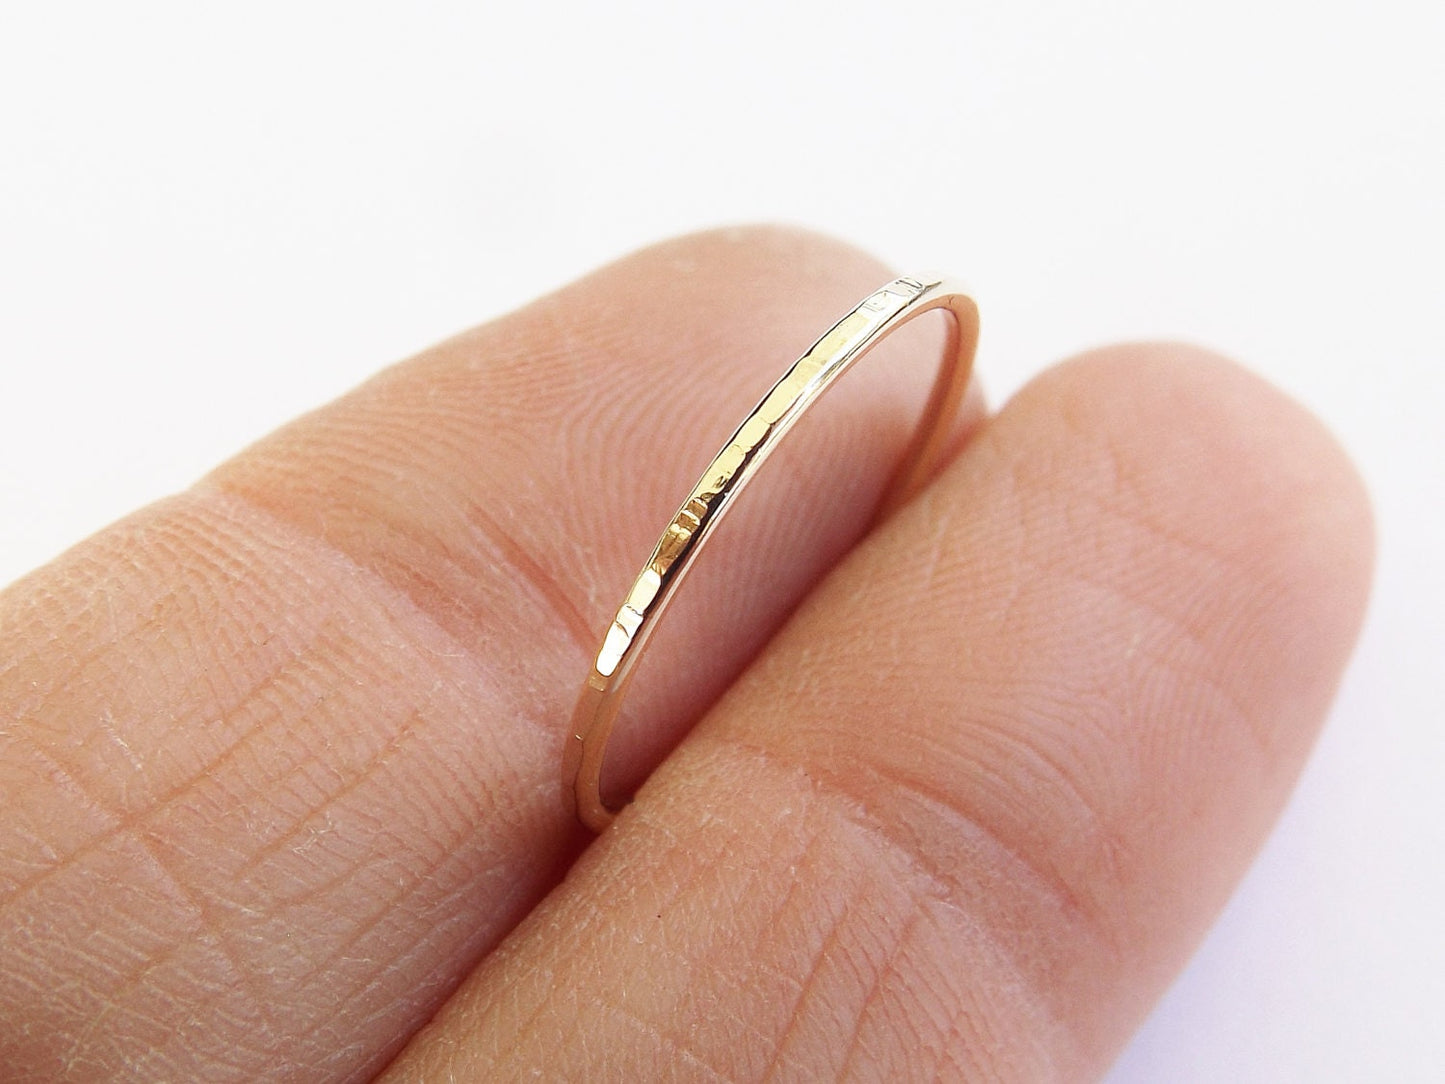 Slim Solid Gold Stacking Ring, Textured Rings, Simple Ring, Minimalist Ring, Notched Ring, Slim Stacking Rings, Solid Gold Ring, Rings, Gift